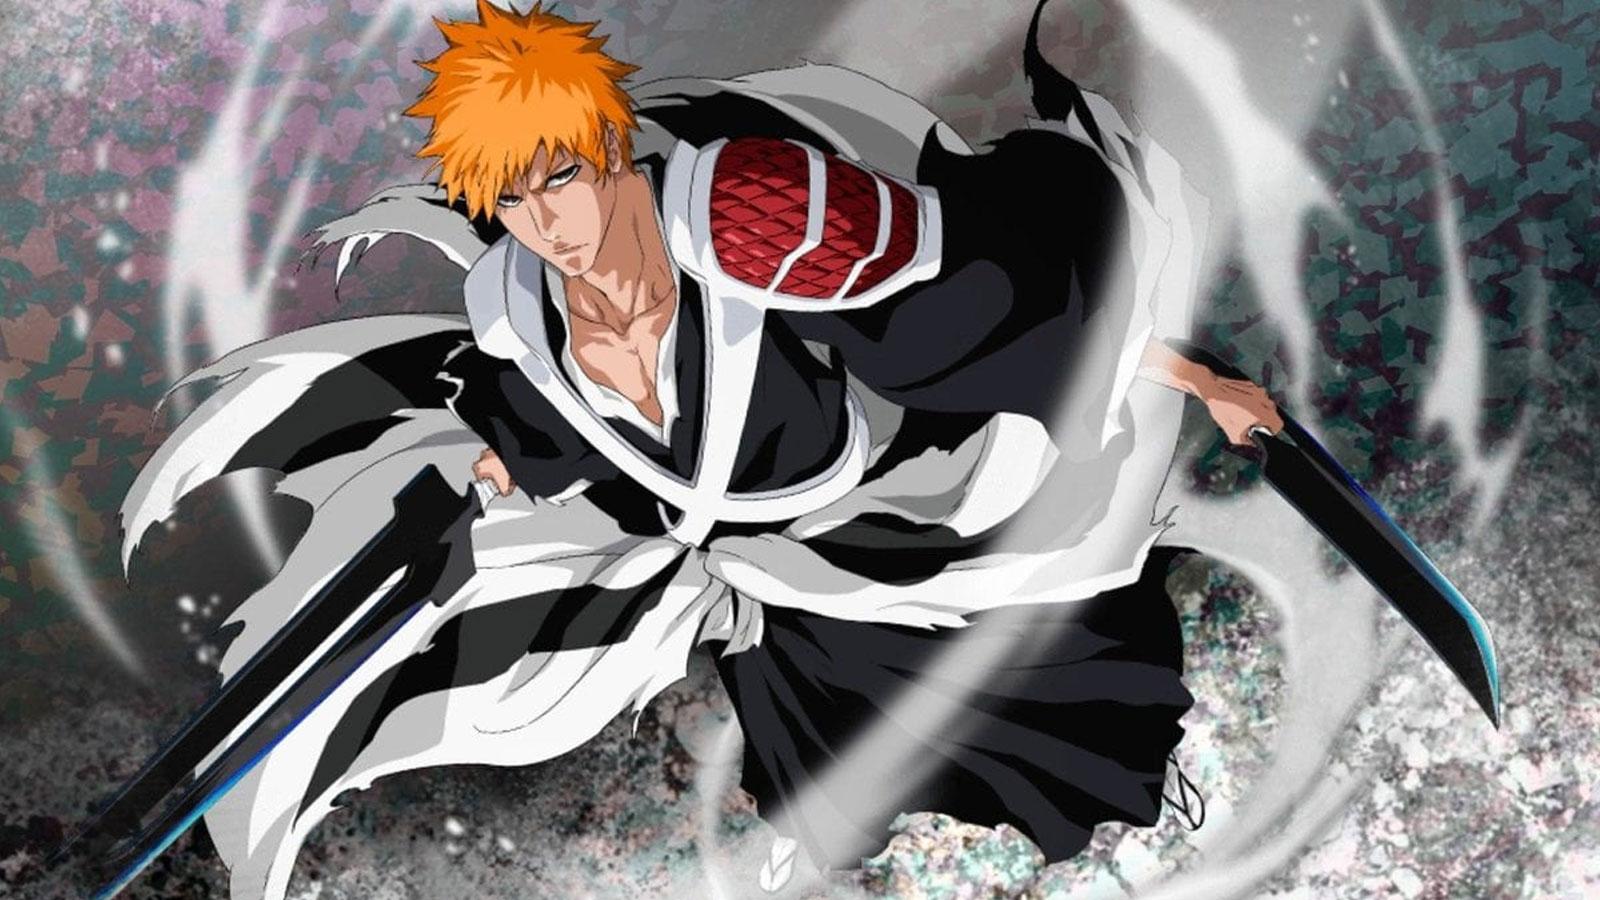 Bleach: Thousand Year Blood War slated to release October on Disney+